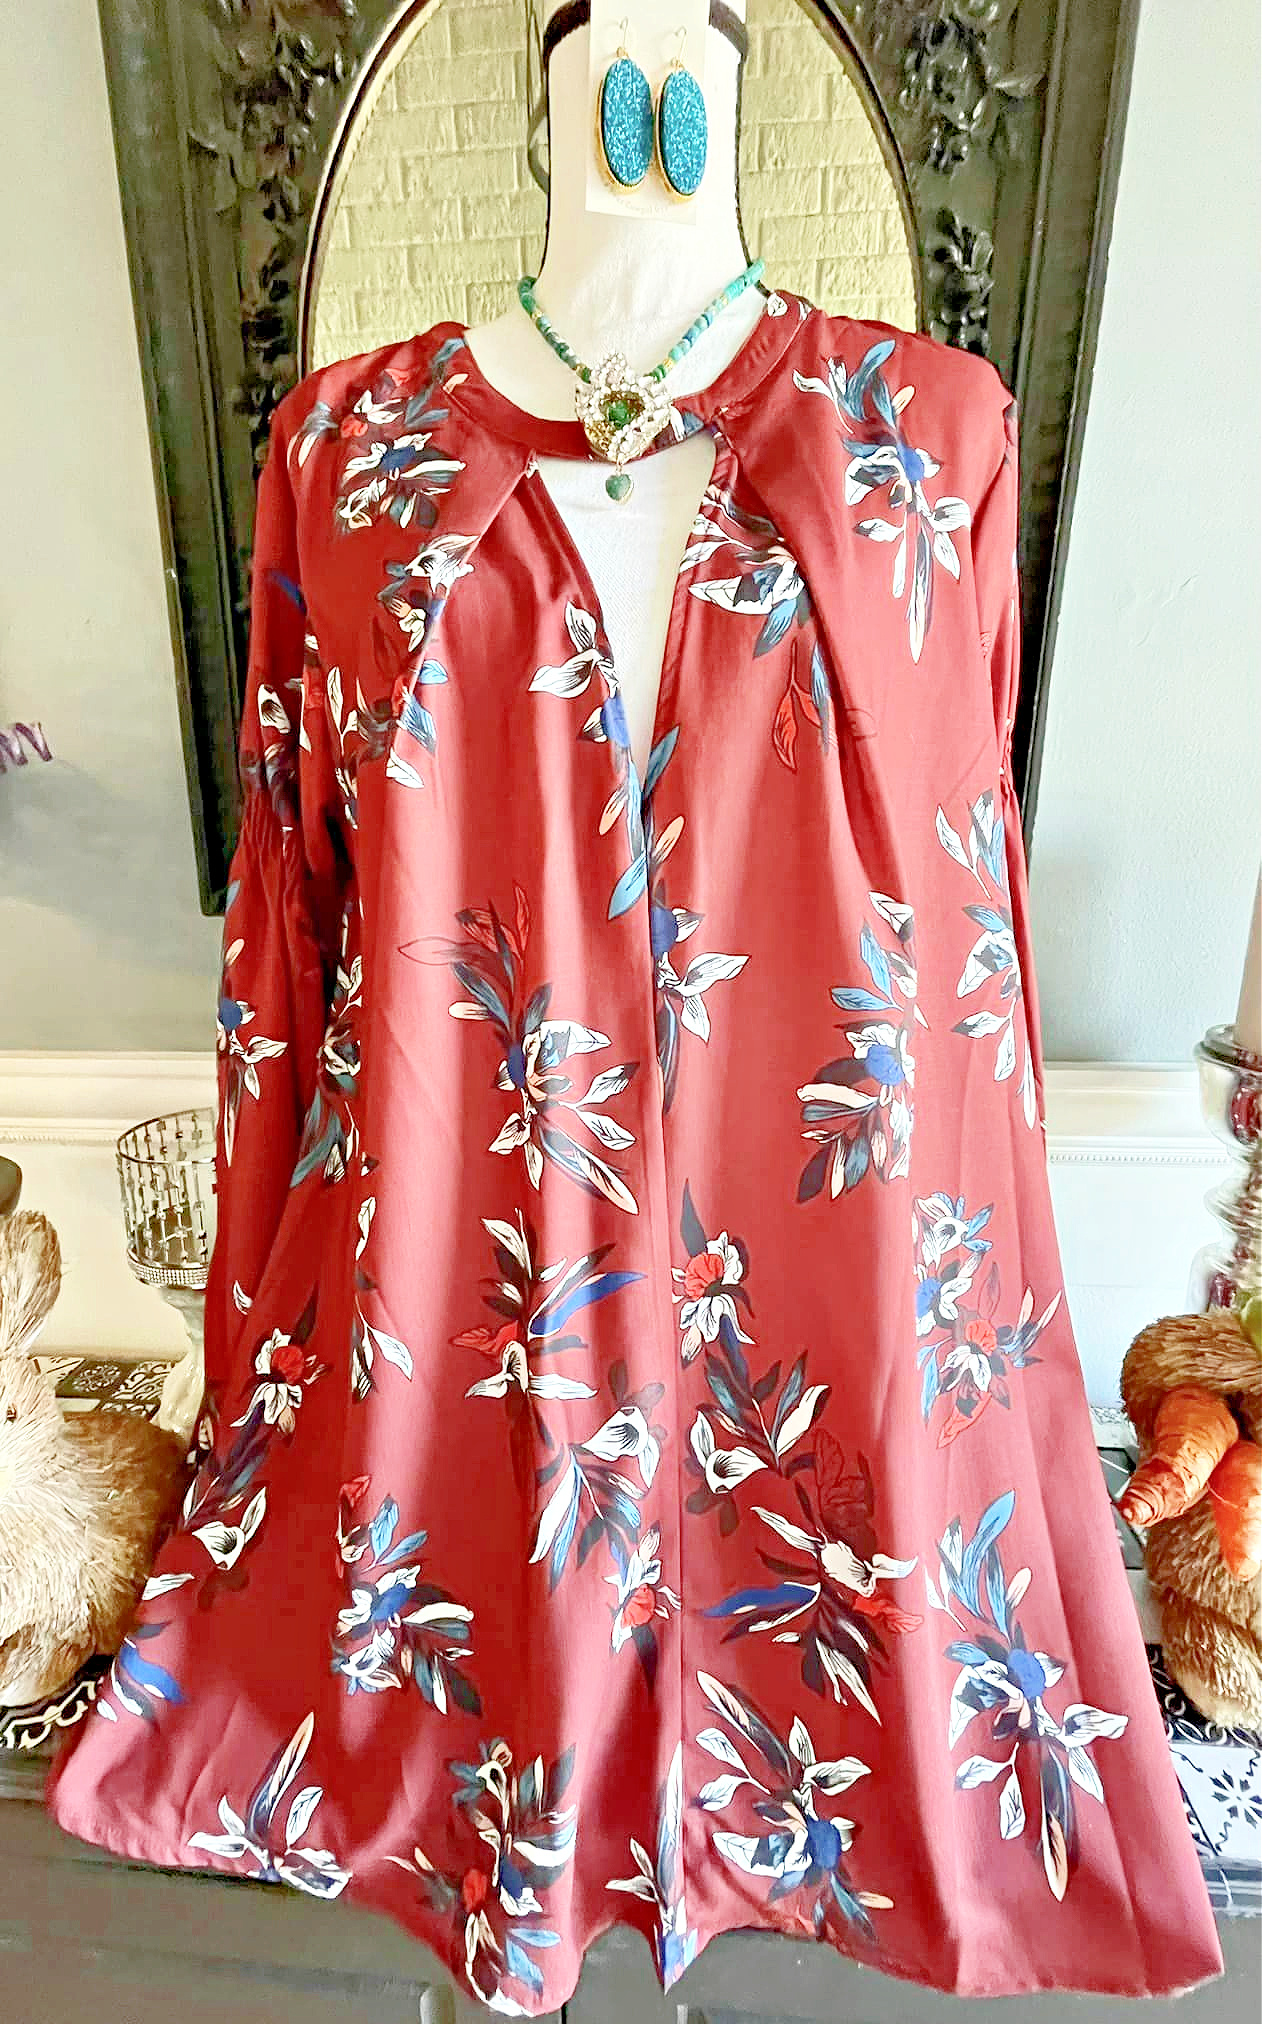 WILDFLOWER DRESS Turquoise Blue & White Floral High Low Keyhole Long Sleeve Red Boho Swing Mini Dress LAST ONE XL